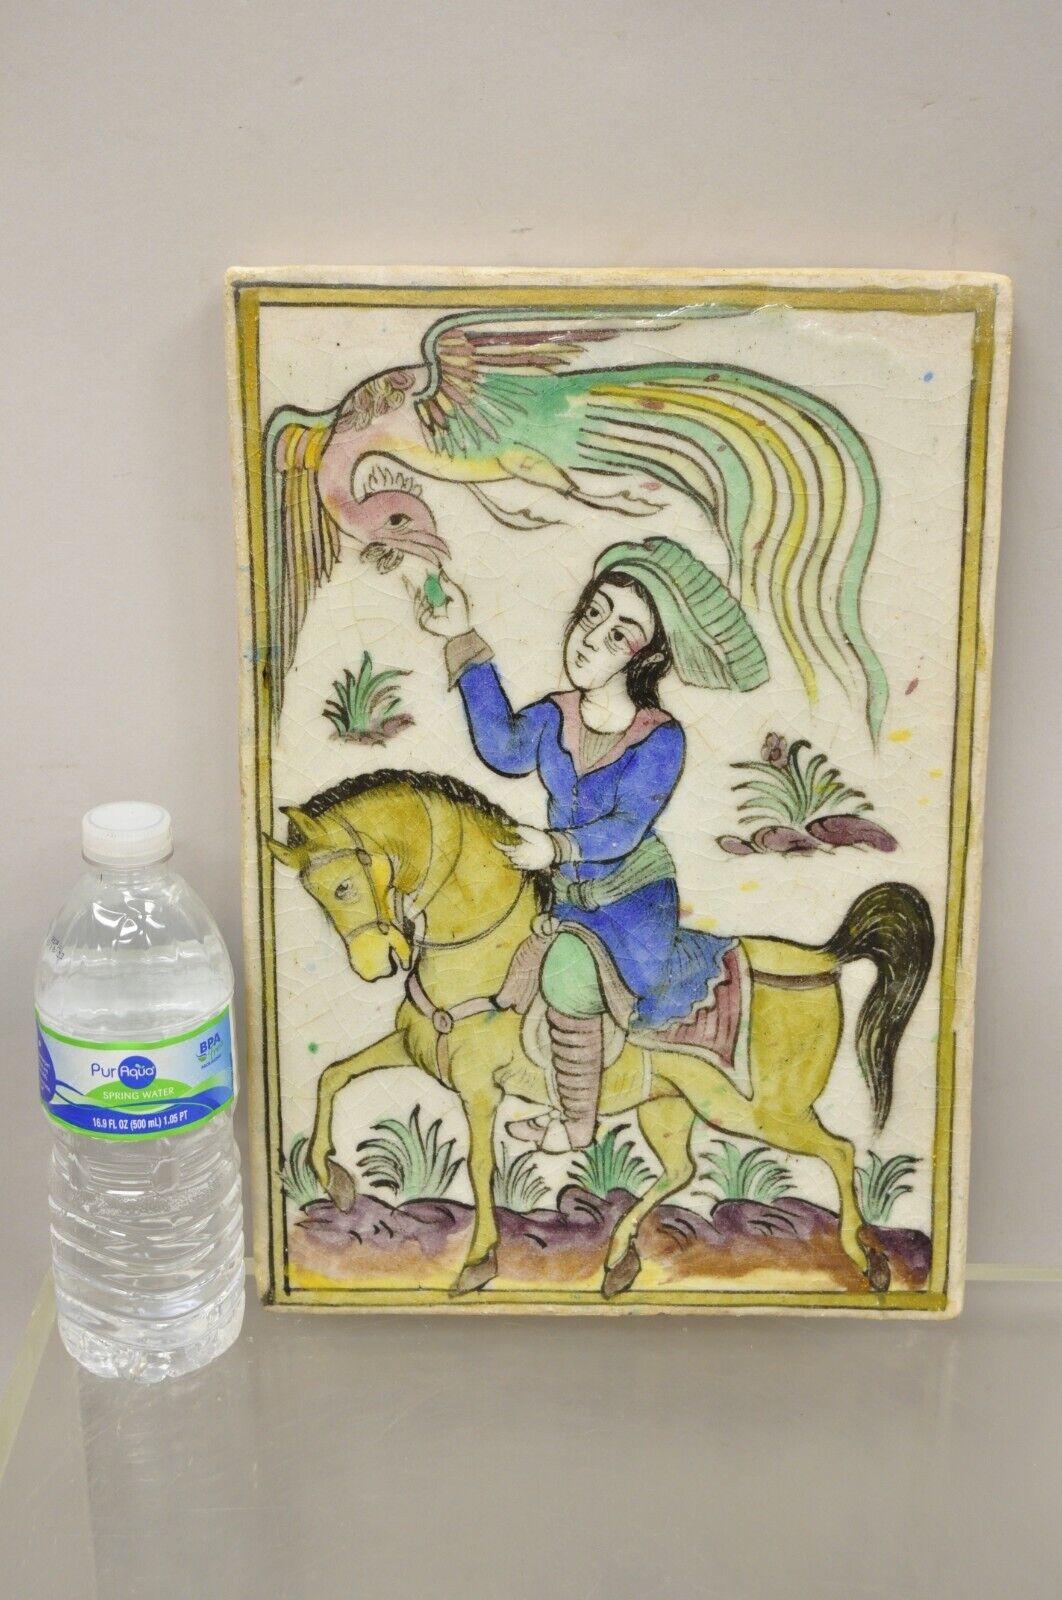 Antique Persian Iznik Qajar style large ceramic pottery tile phoenix bird with horse and rider C1. Original crackle glazed finish, heavy ceramic pottery construction, very impressive detail, wonderful style and form. Great to mount as wall art or